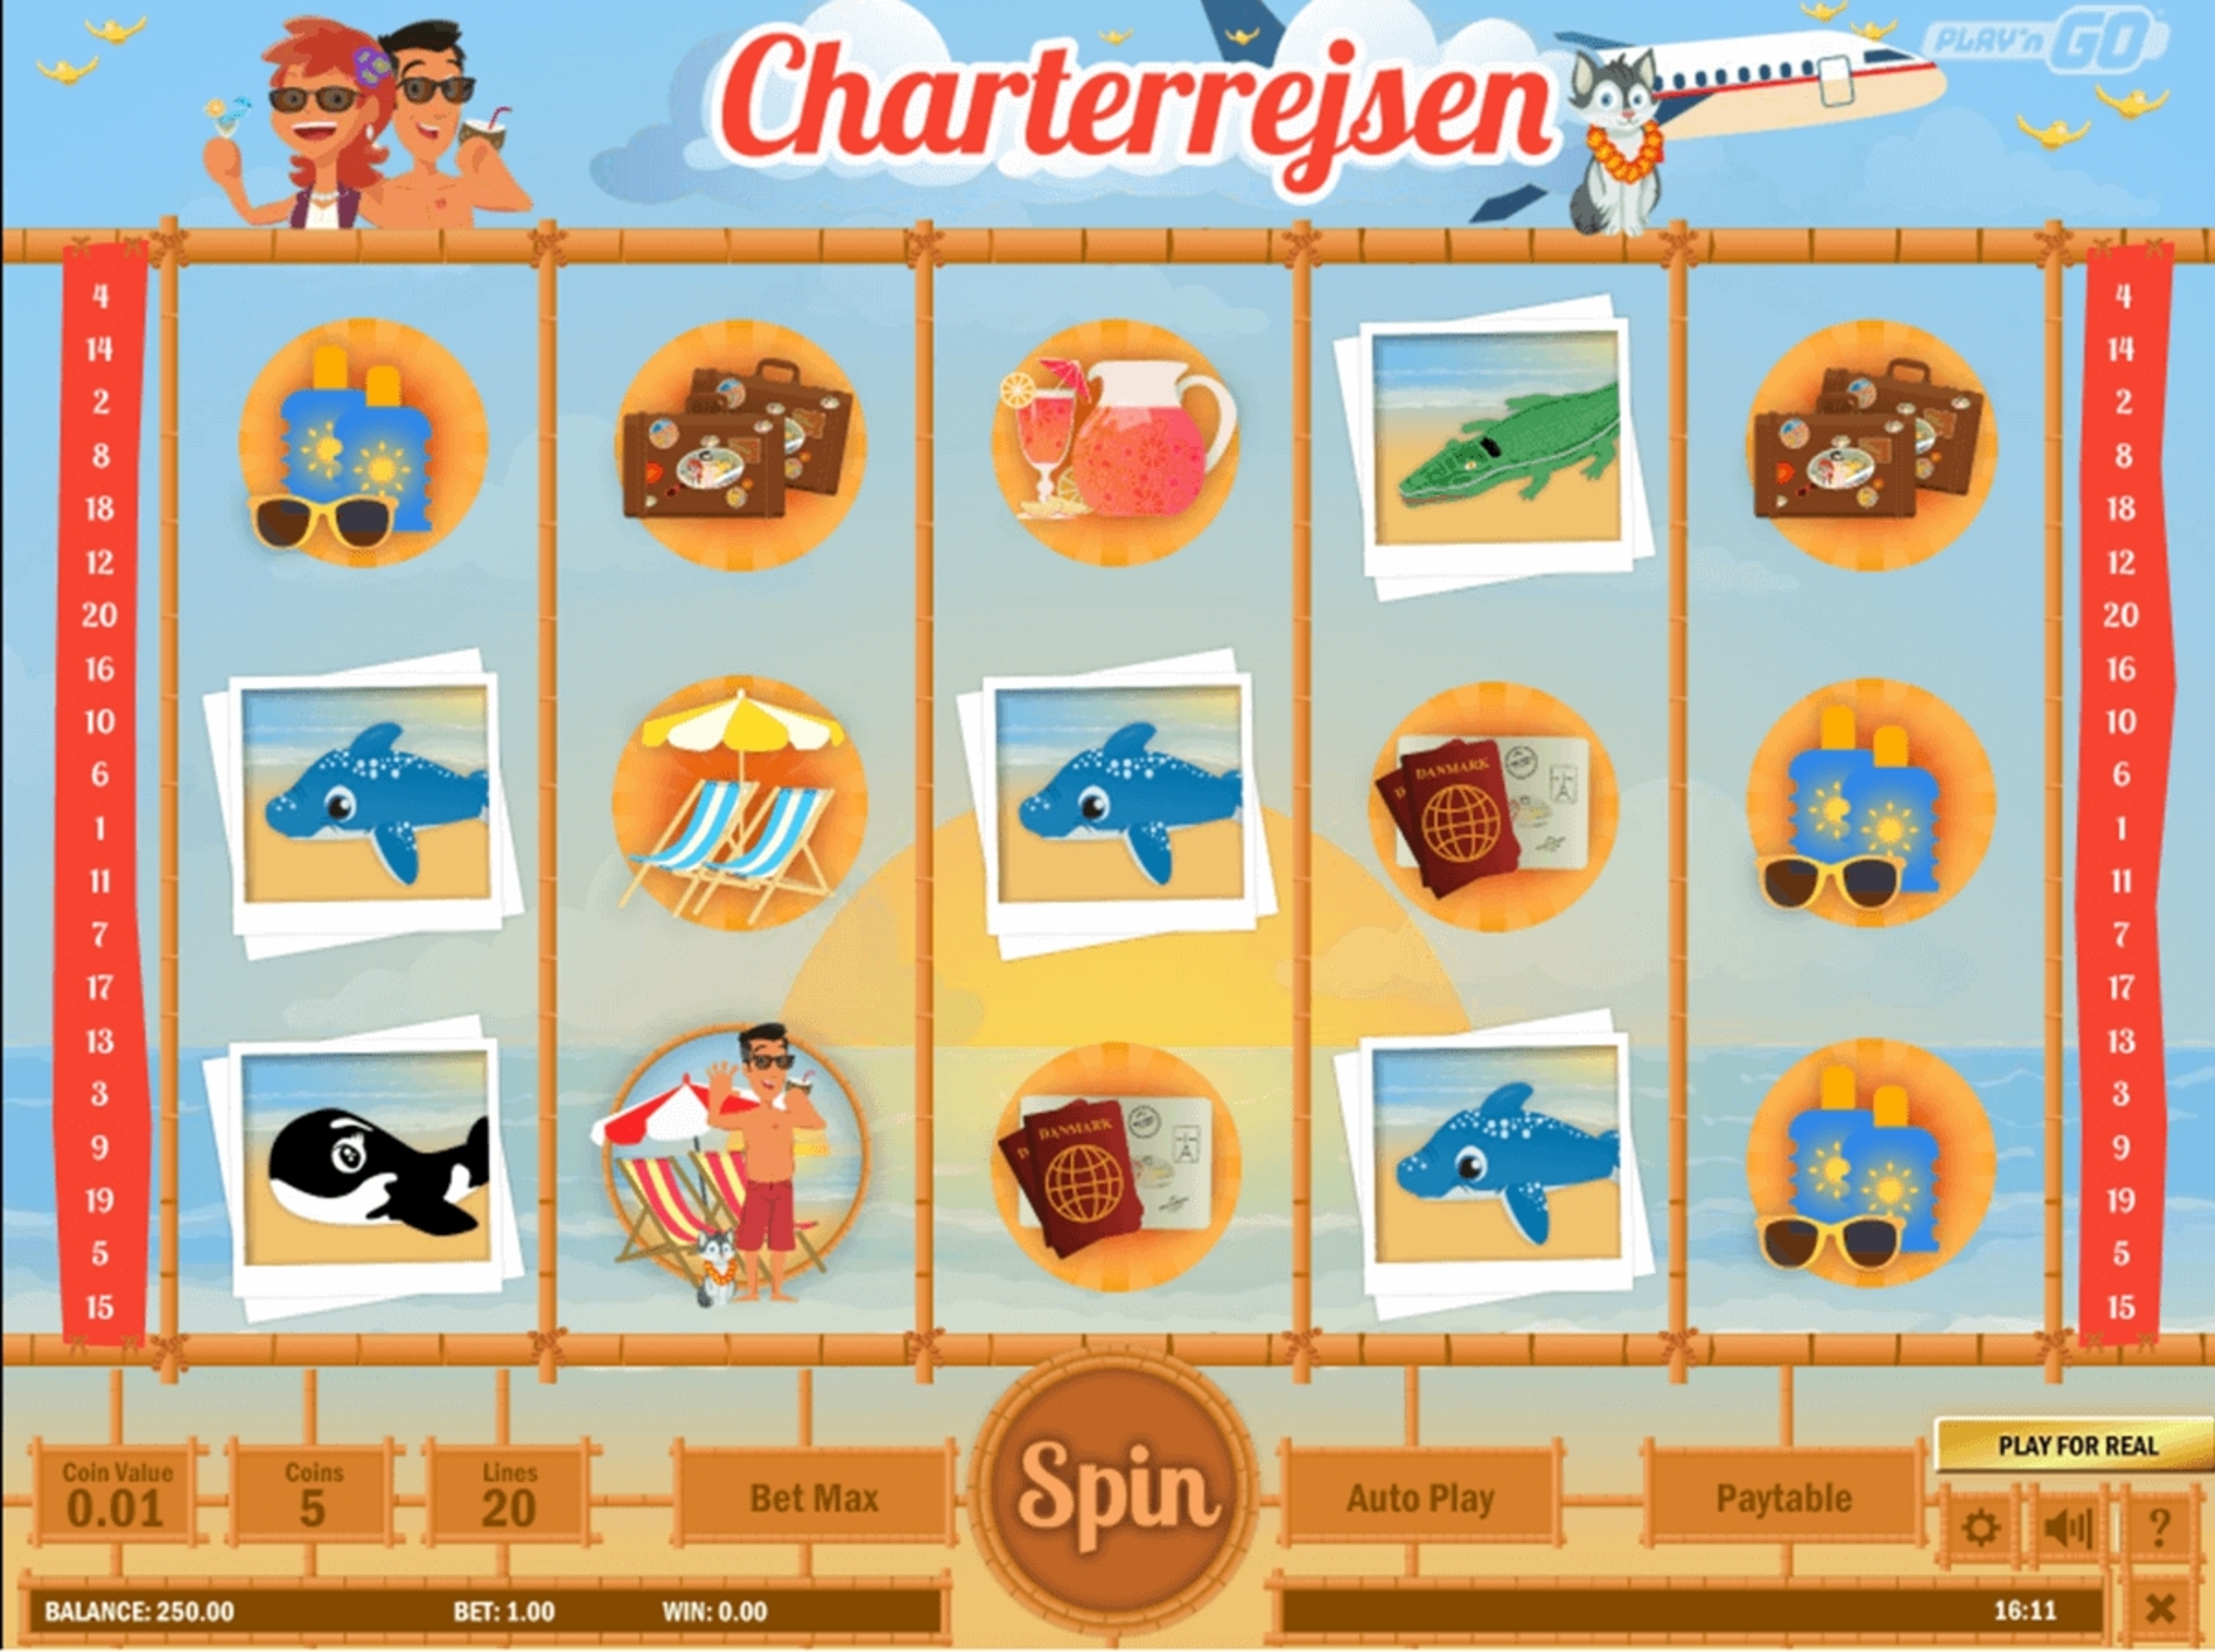 The Charterrejsen Online Slot Demo Game by Playn GO